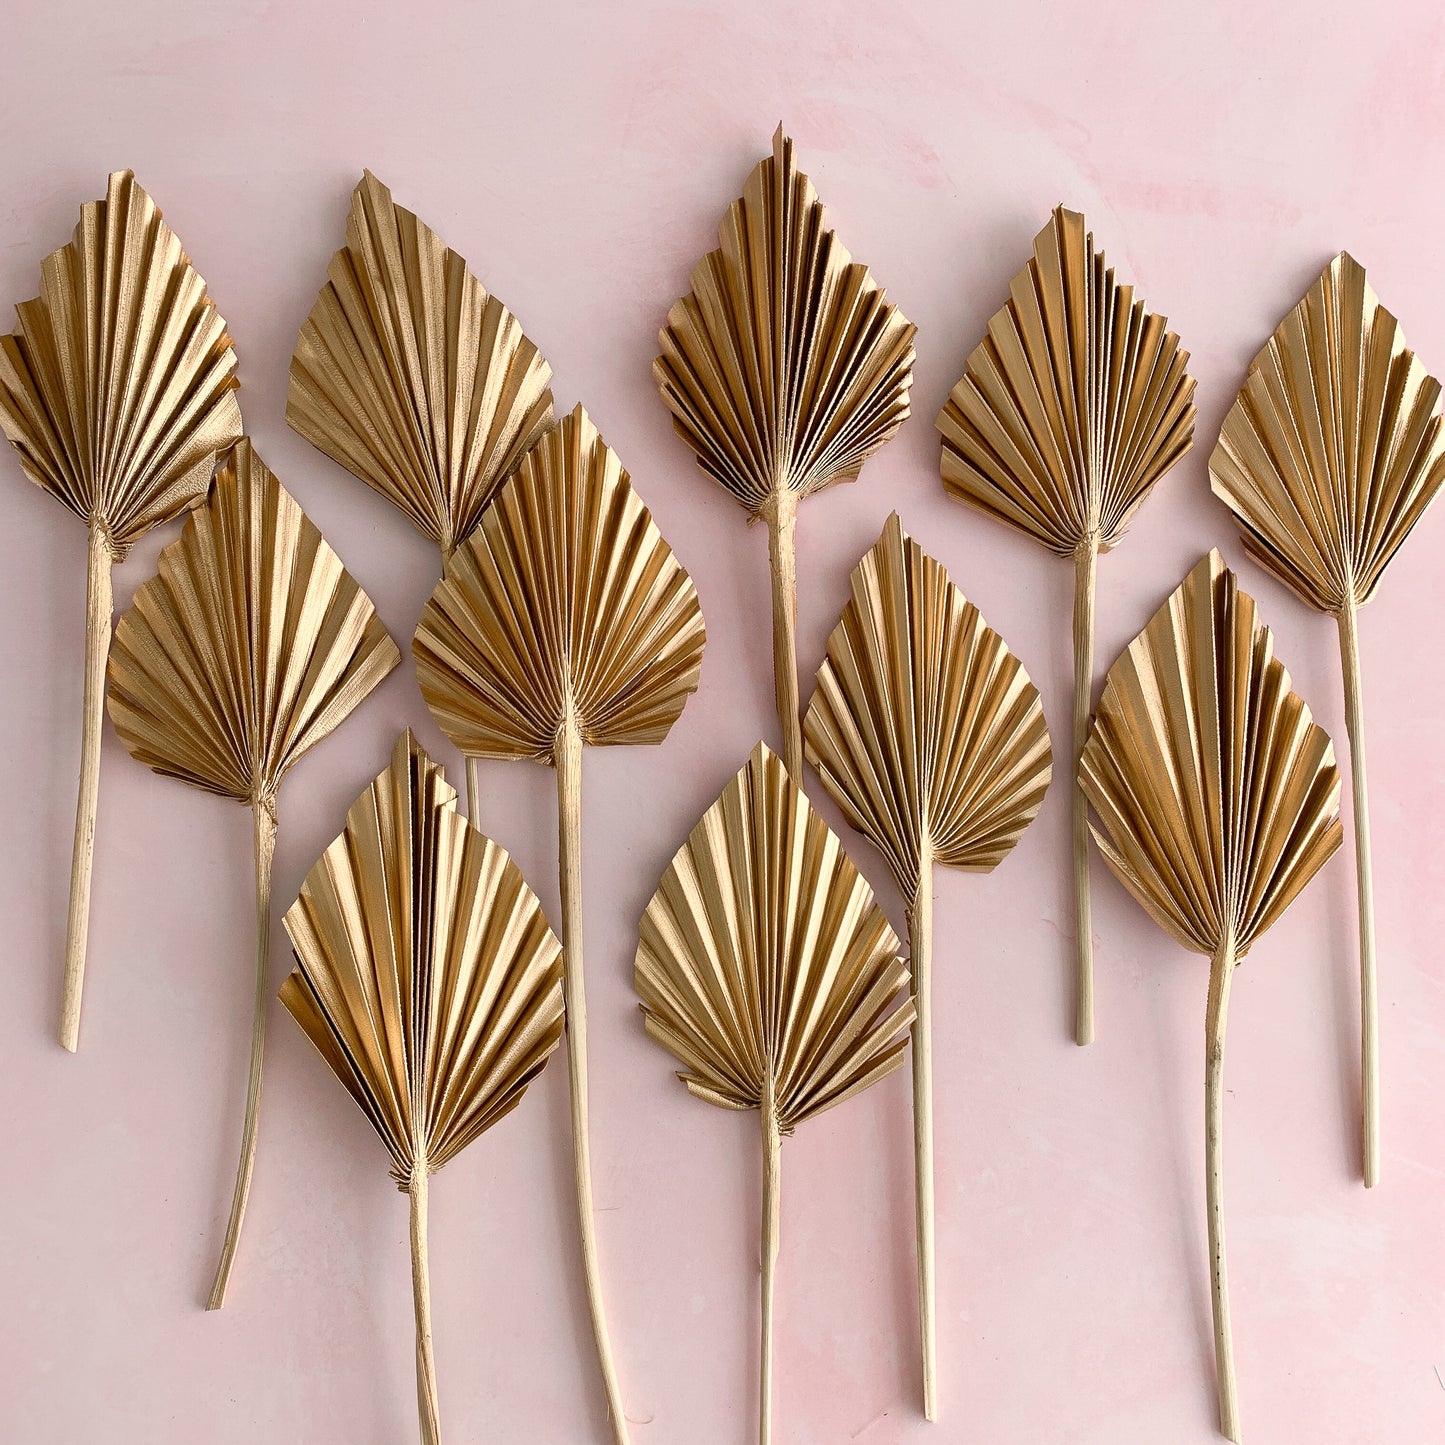 Wonky gold palm spears (not so perfect)